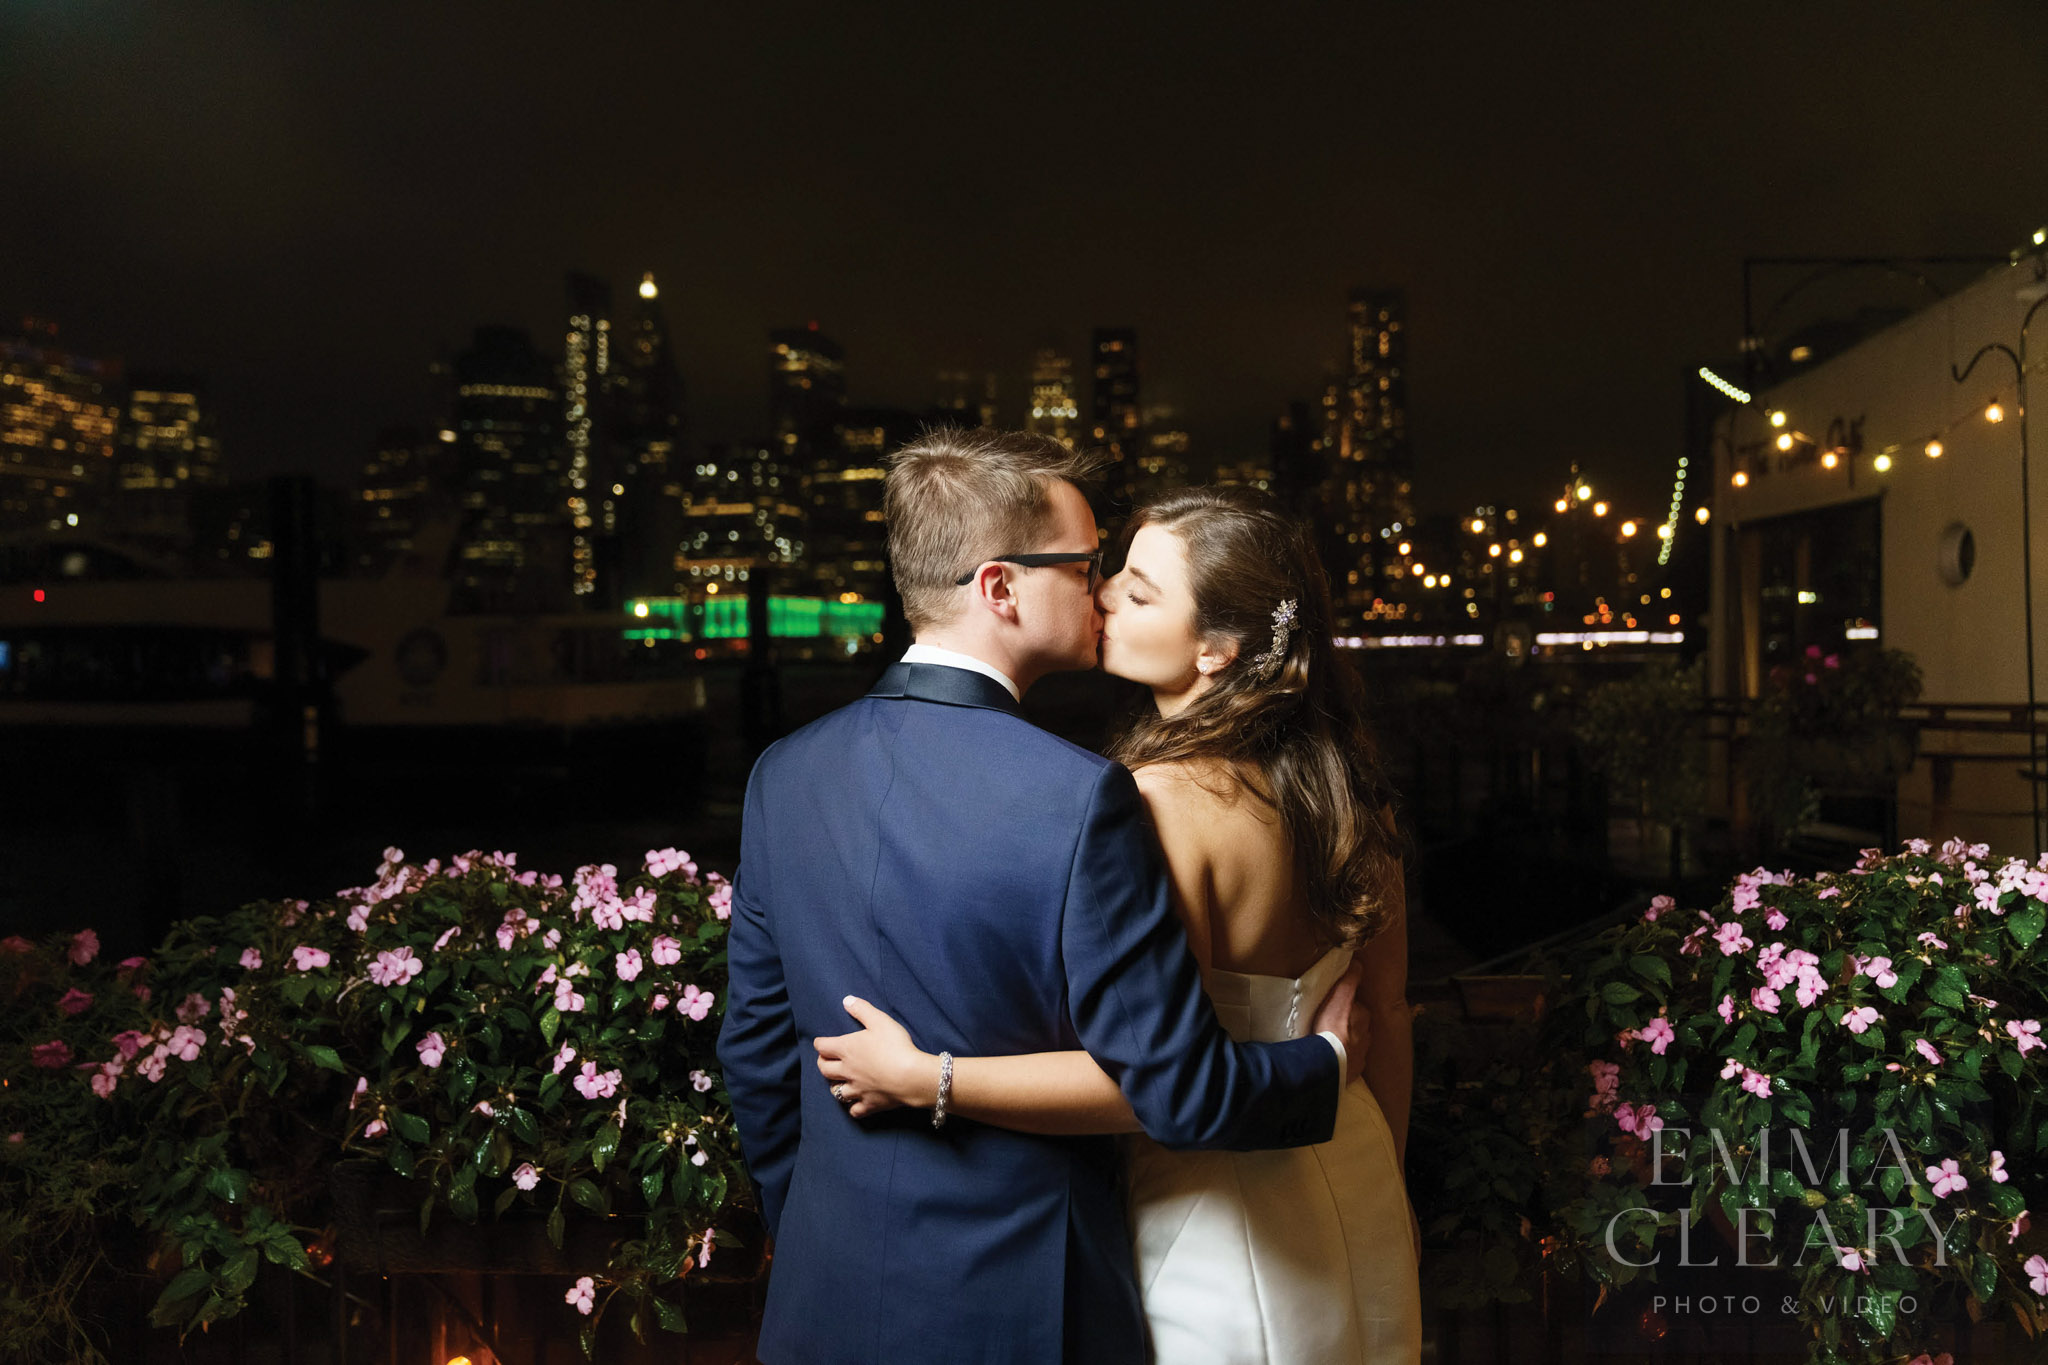 A couple's kiss with a view of the city